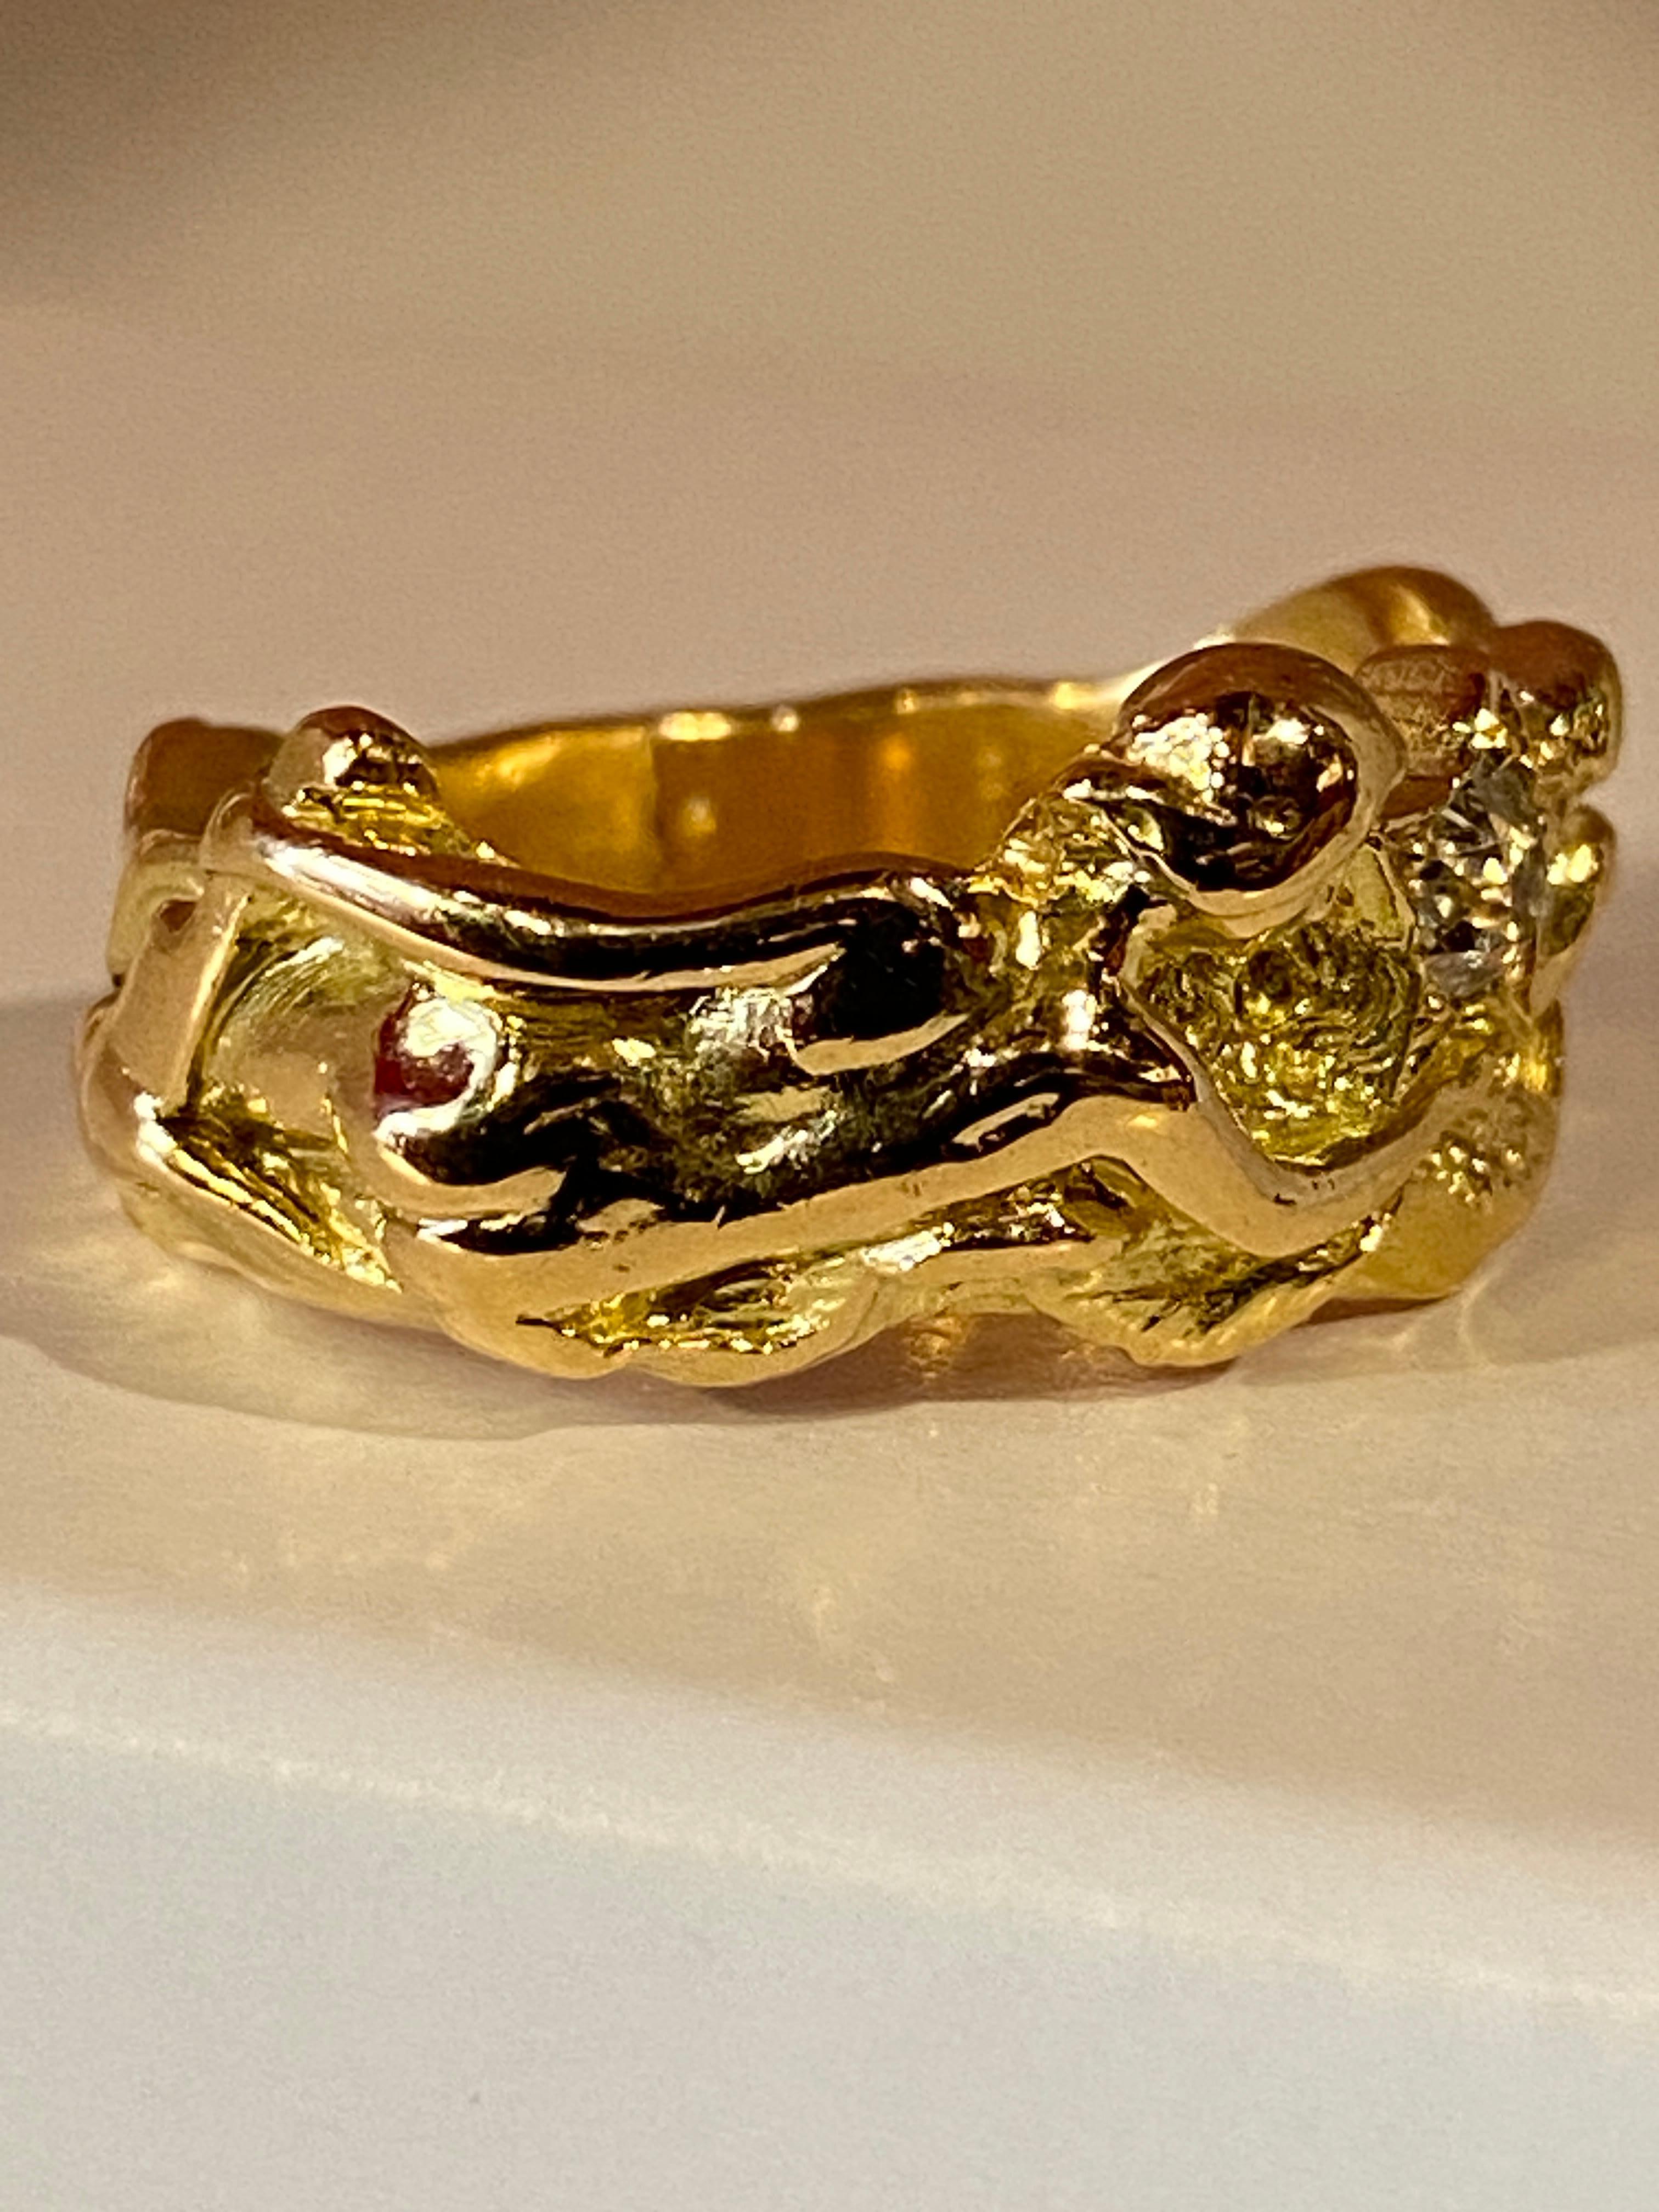 18 Carat Solid Gold Ring :Woman Braving the Wawes and Holding a Diamond Starfish 10